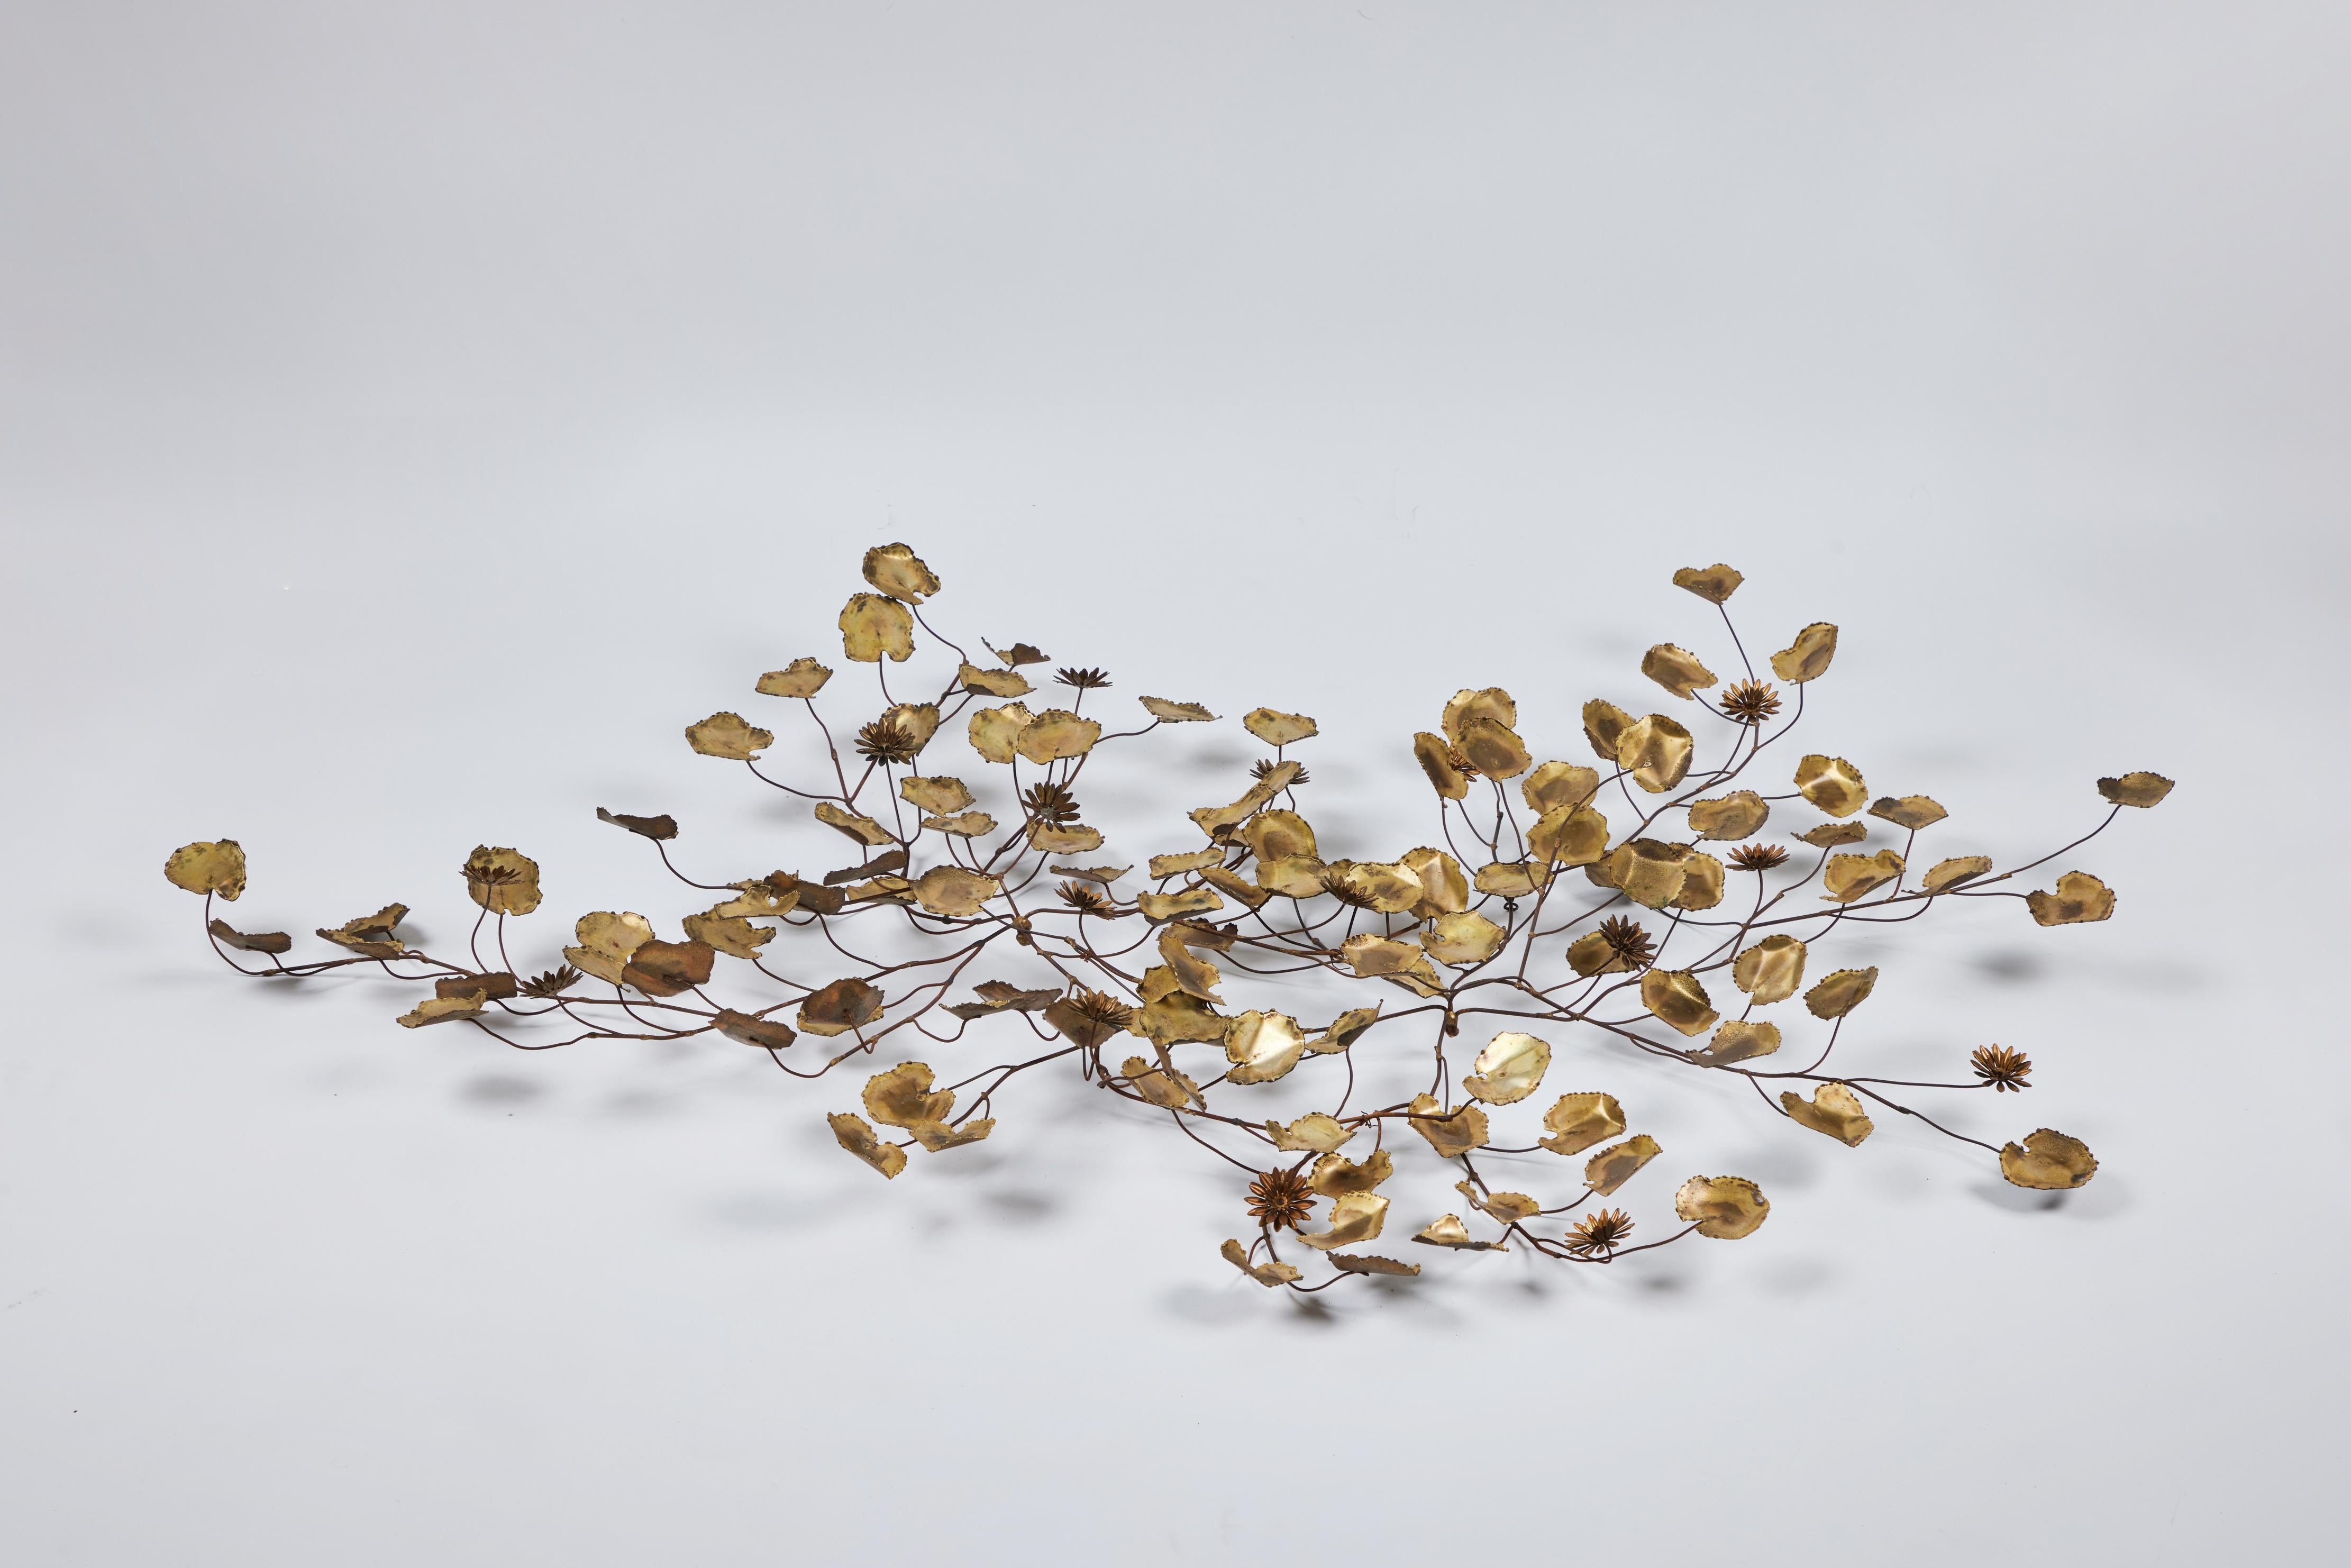 Light and Airy - this fantastic Mid Century wall sculpture is breathtaking. It is made up of a series of sculpted oxidized brass lily pads accented by a few brass lily flowers dispersed through a series of intertwined branches making this a